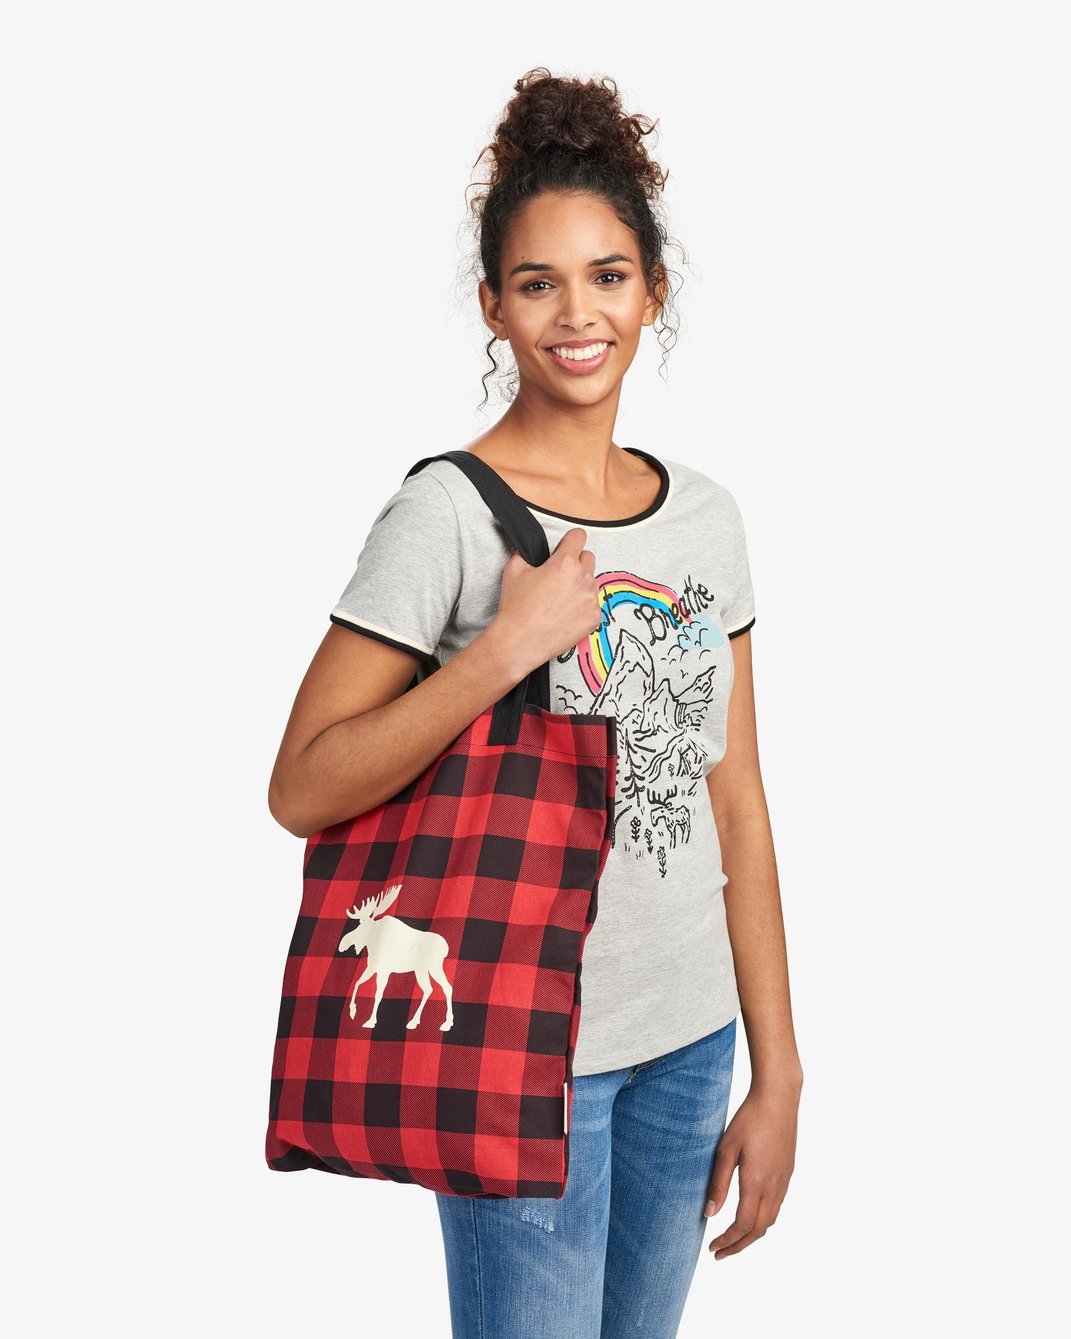 View larger image of Moose on Plaid Reusable Tote Bag